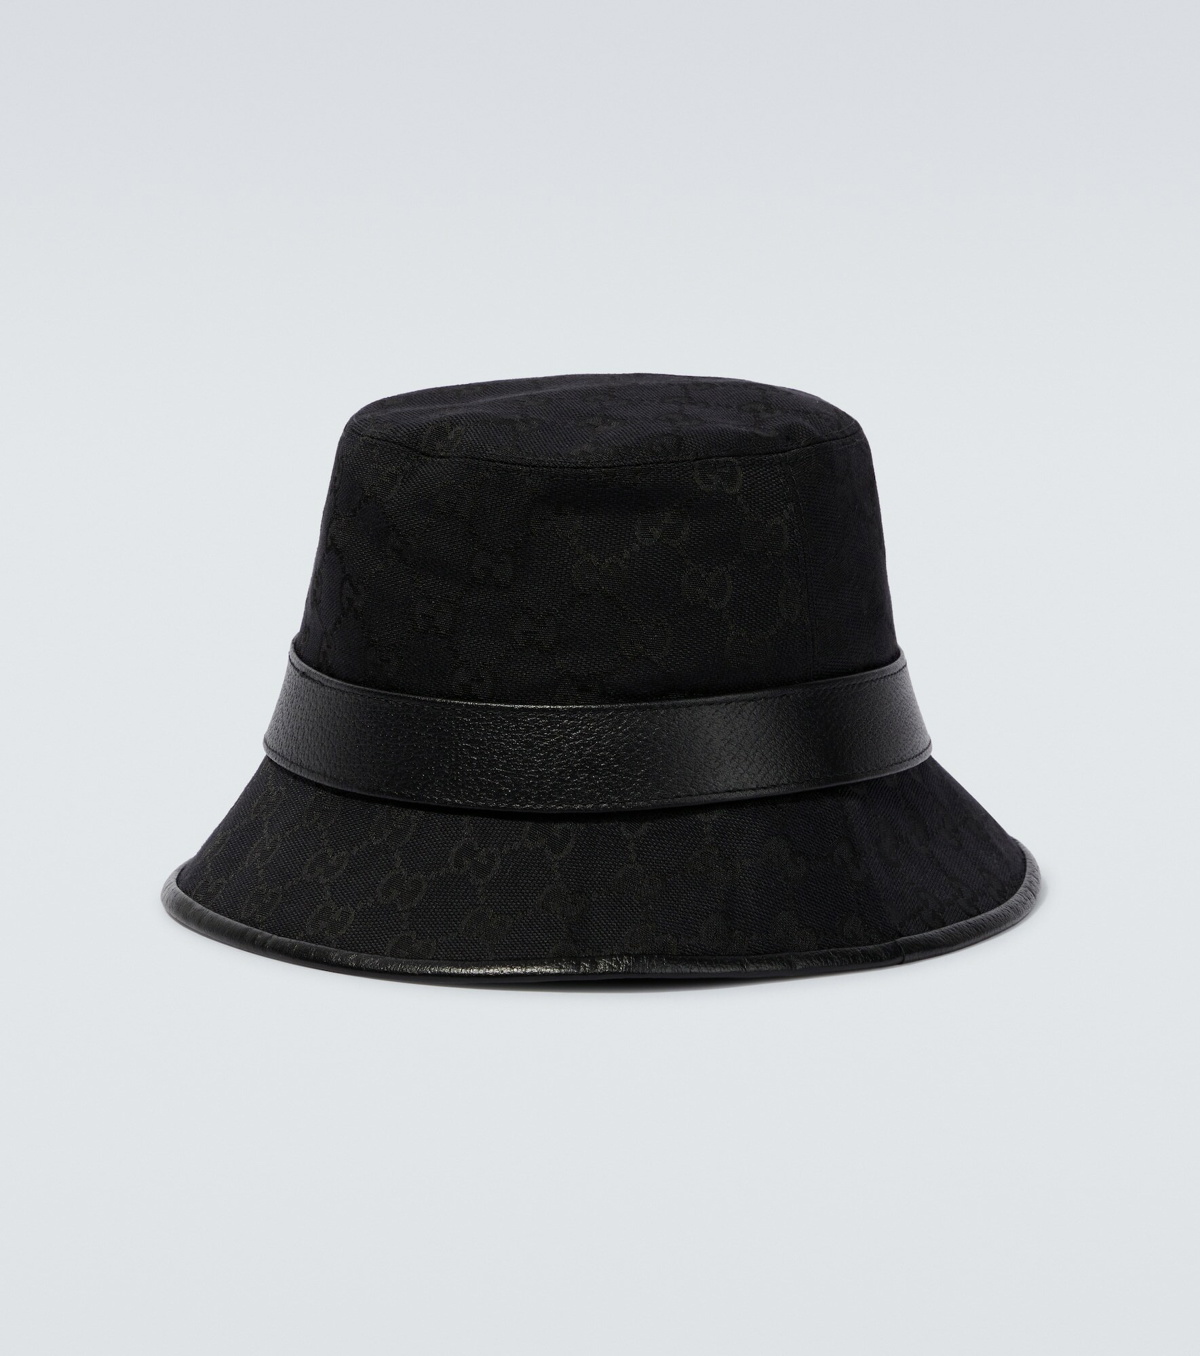 Gucci GG Canvas Bucket Hat with Double G